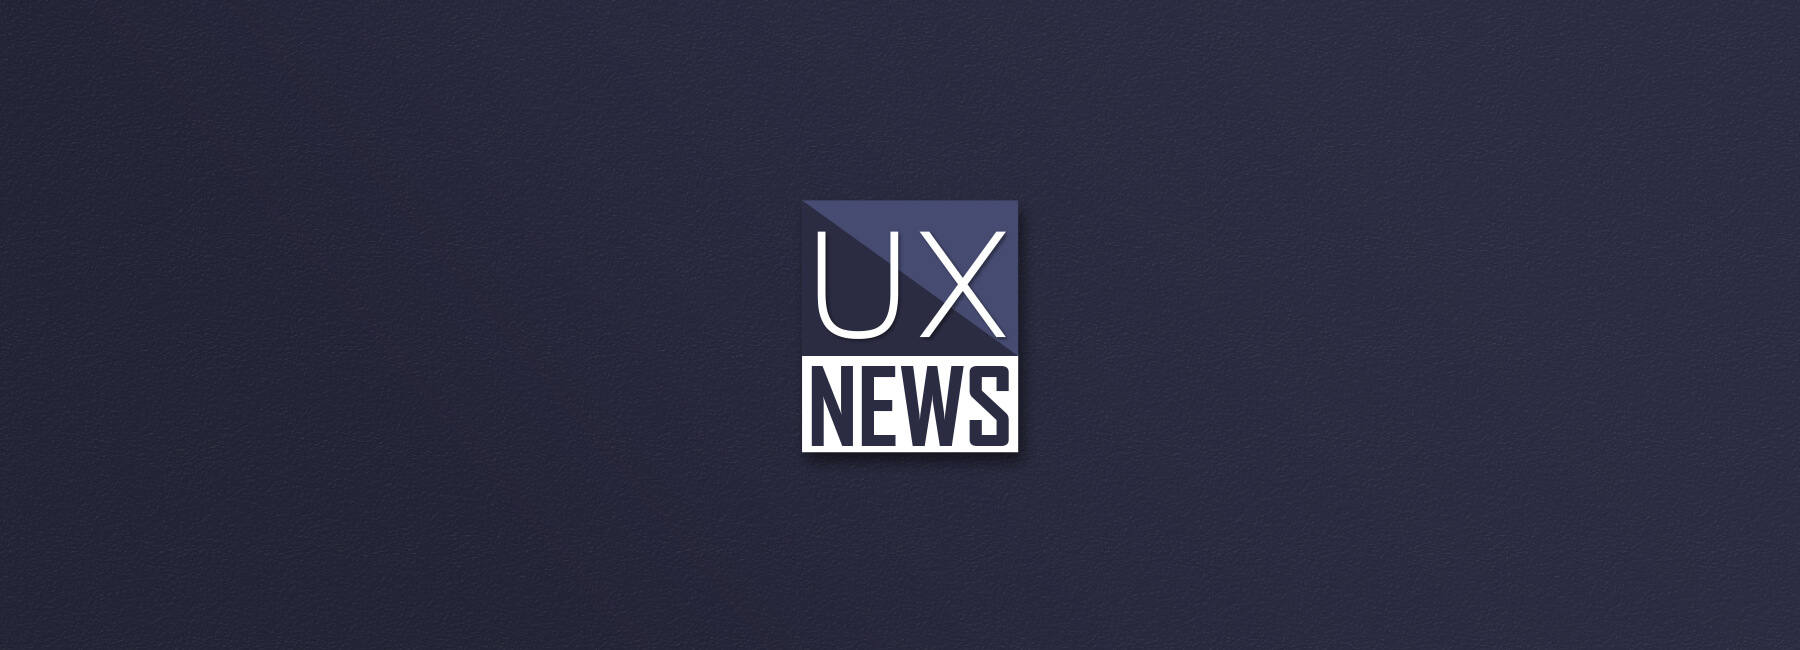 Proud sponsor of a new online community: User Experience News